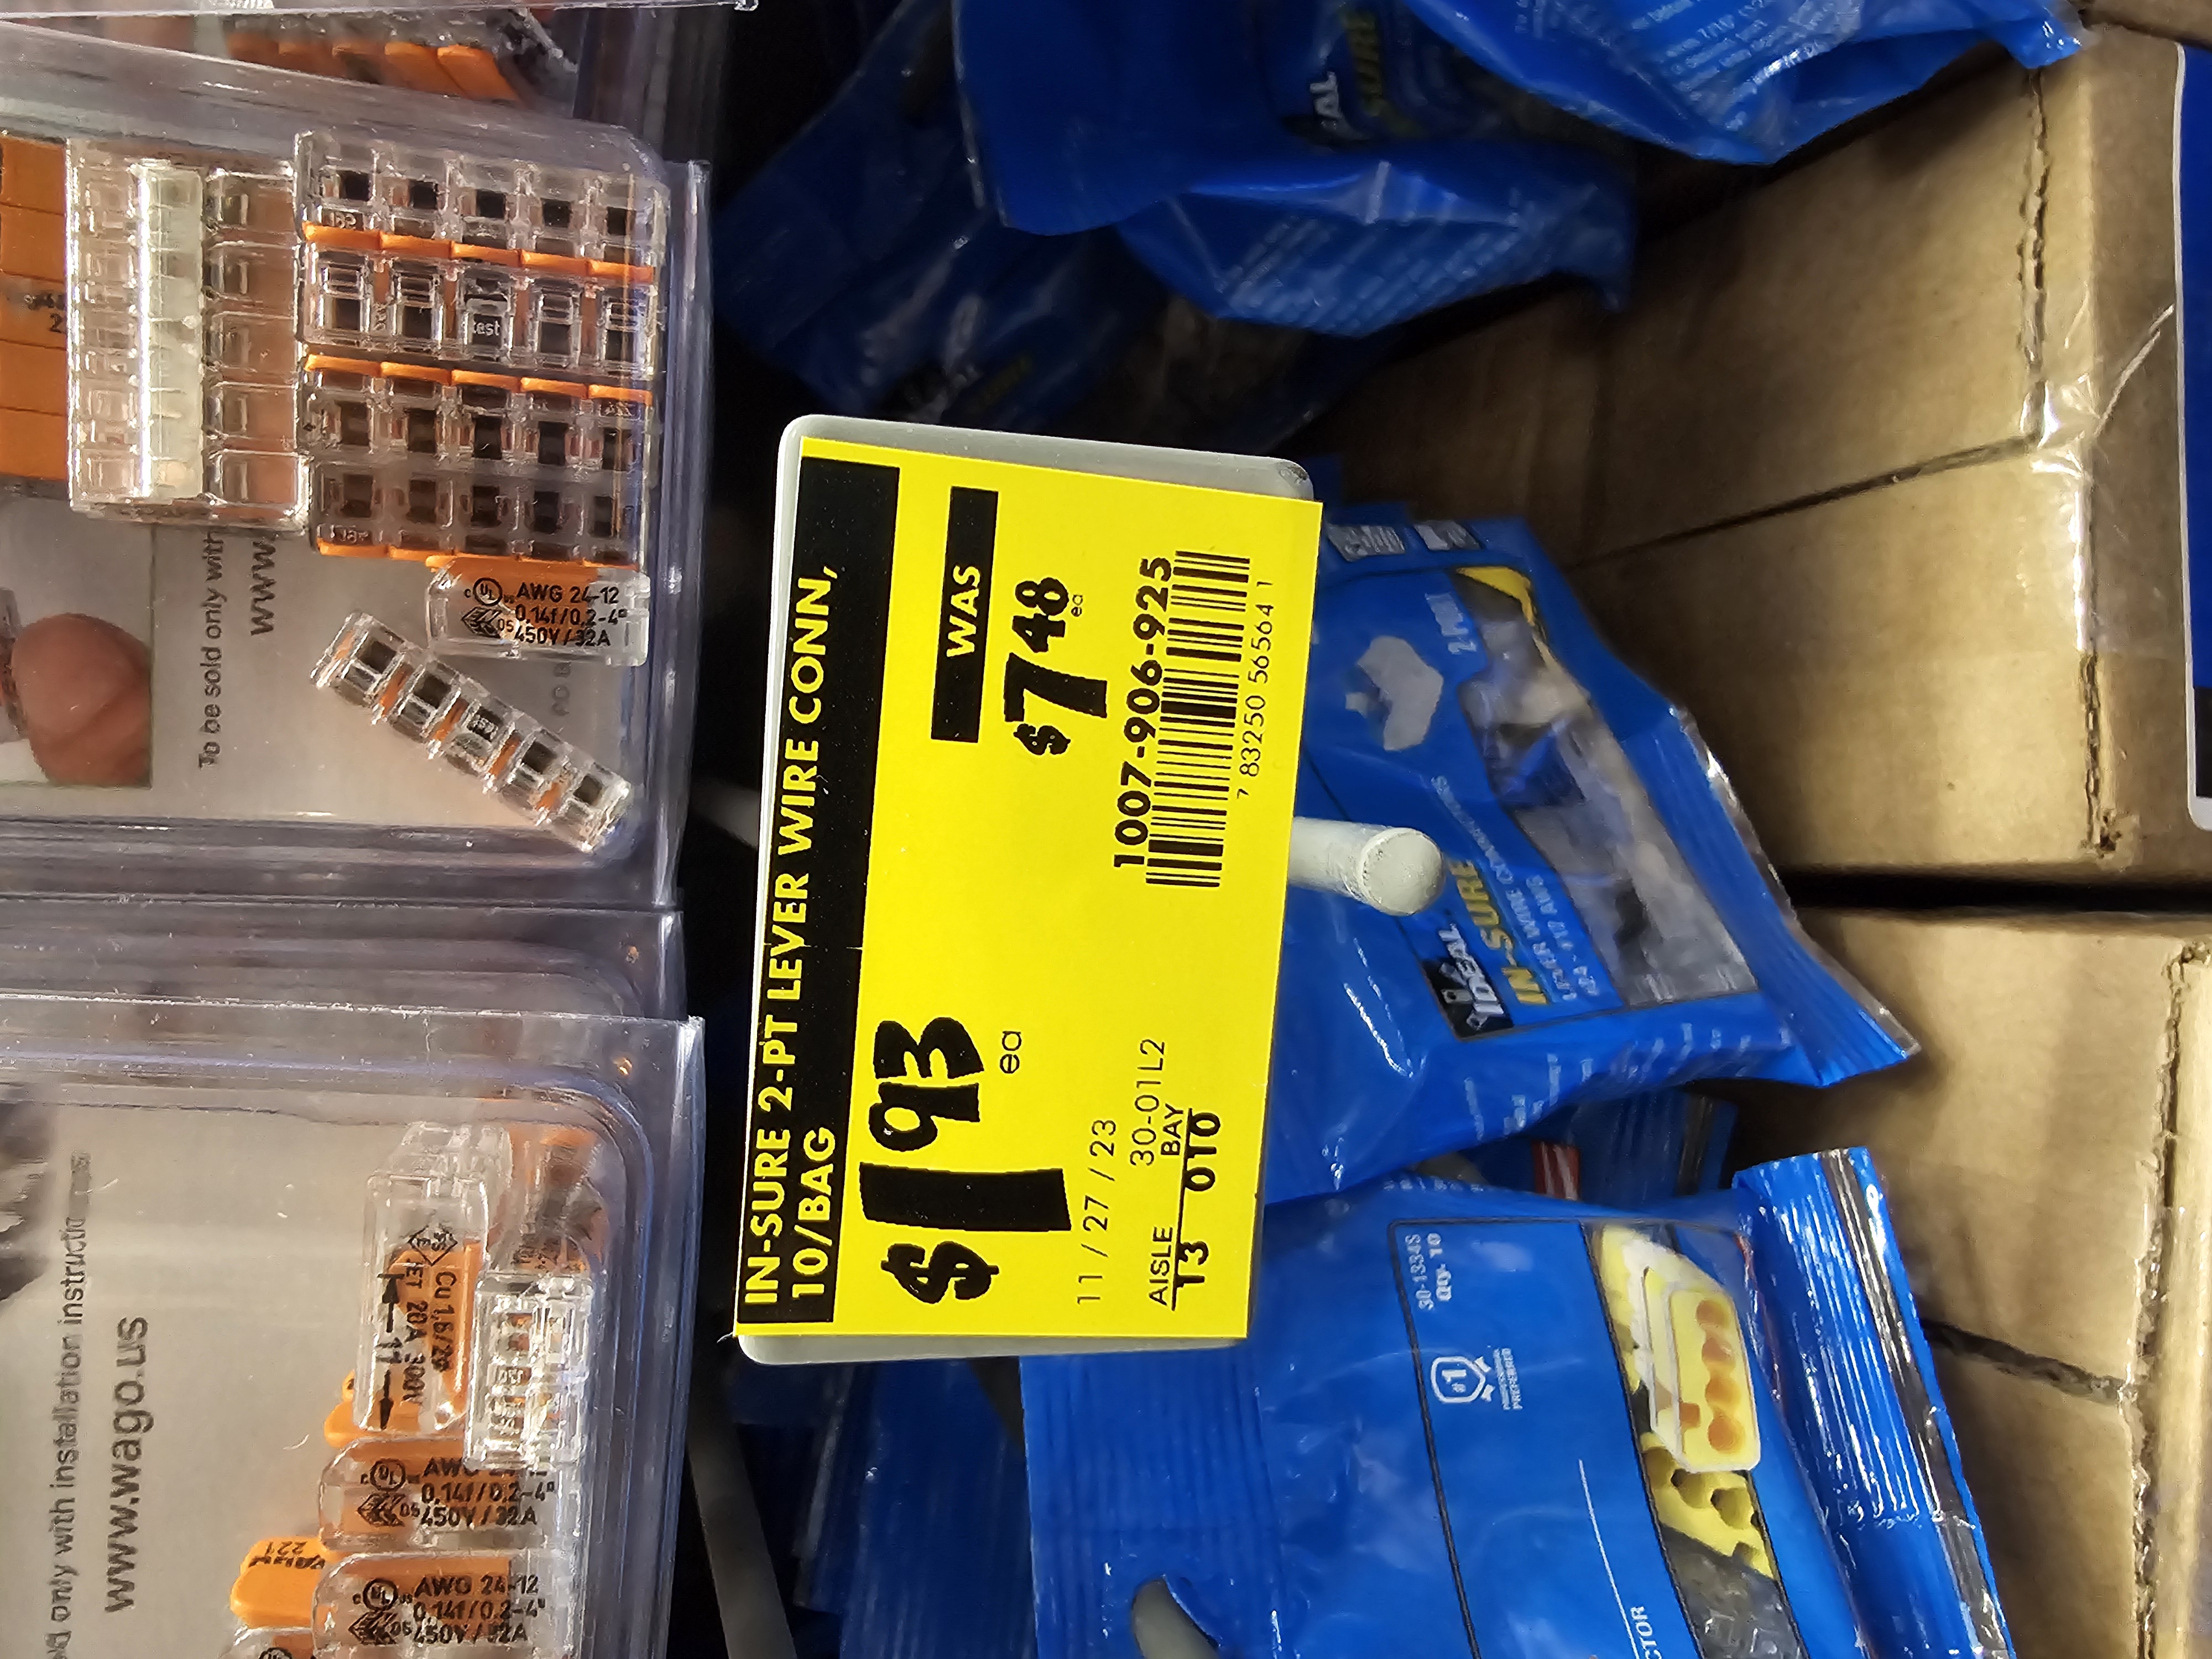 In-Sure lever wire connectors .. more than 60% off $1.93 (ymmv)